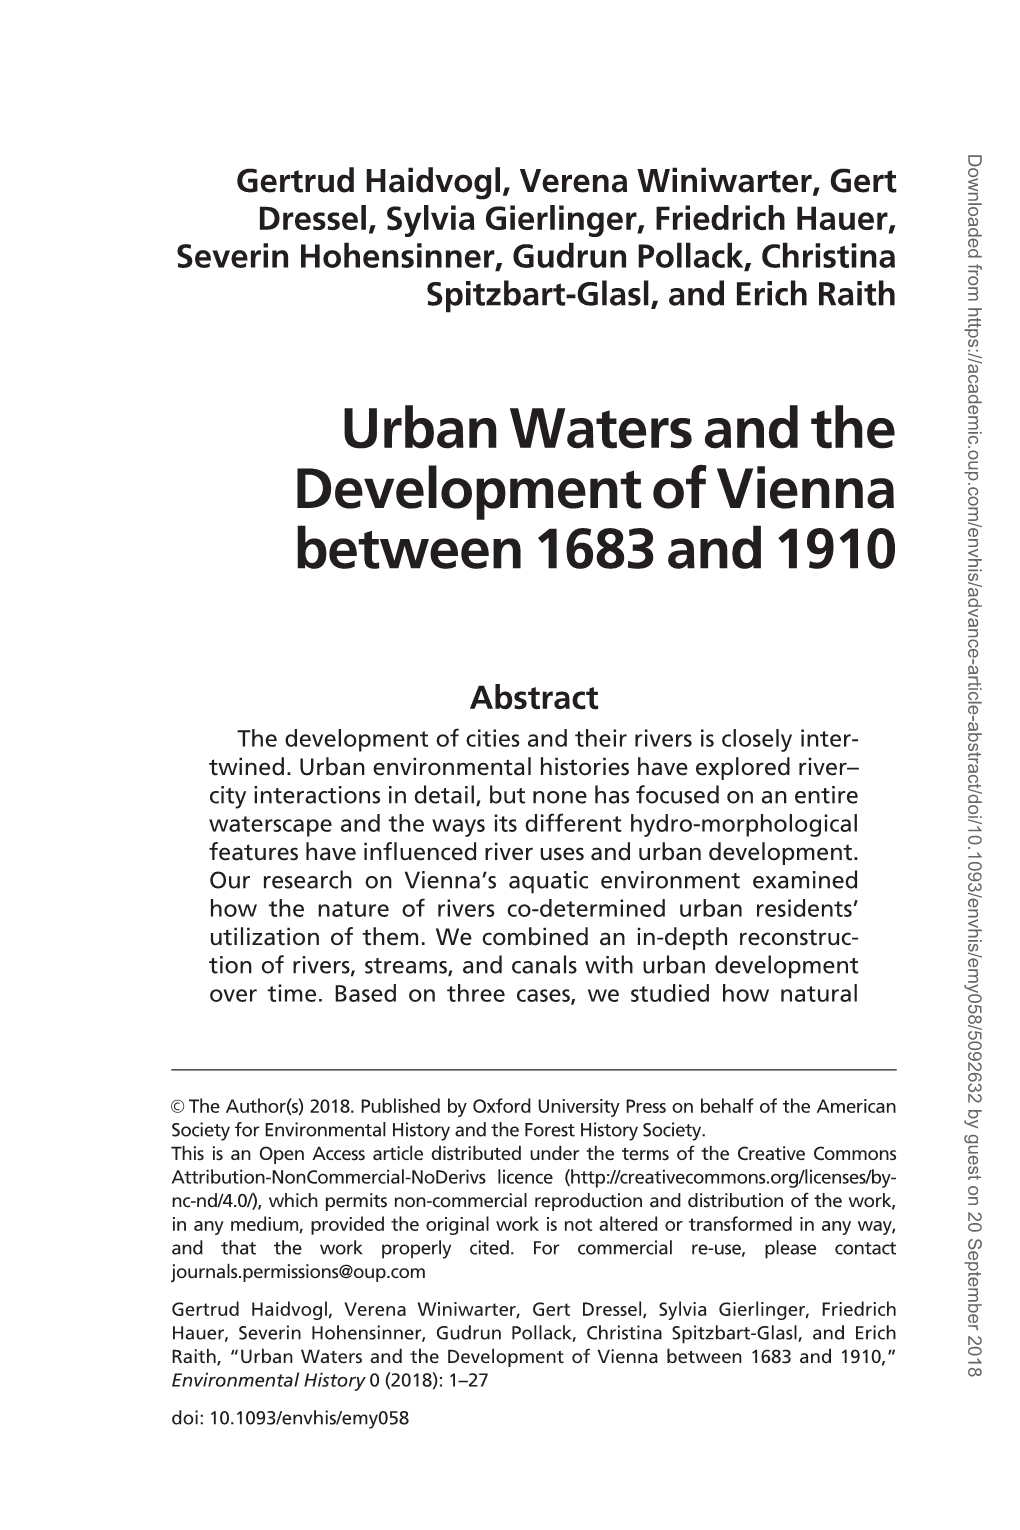 Urban Waters and the Development of Vienna Between 1683 and 1910